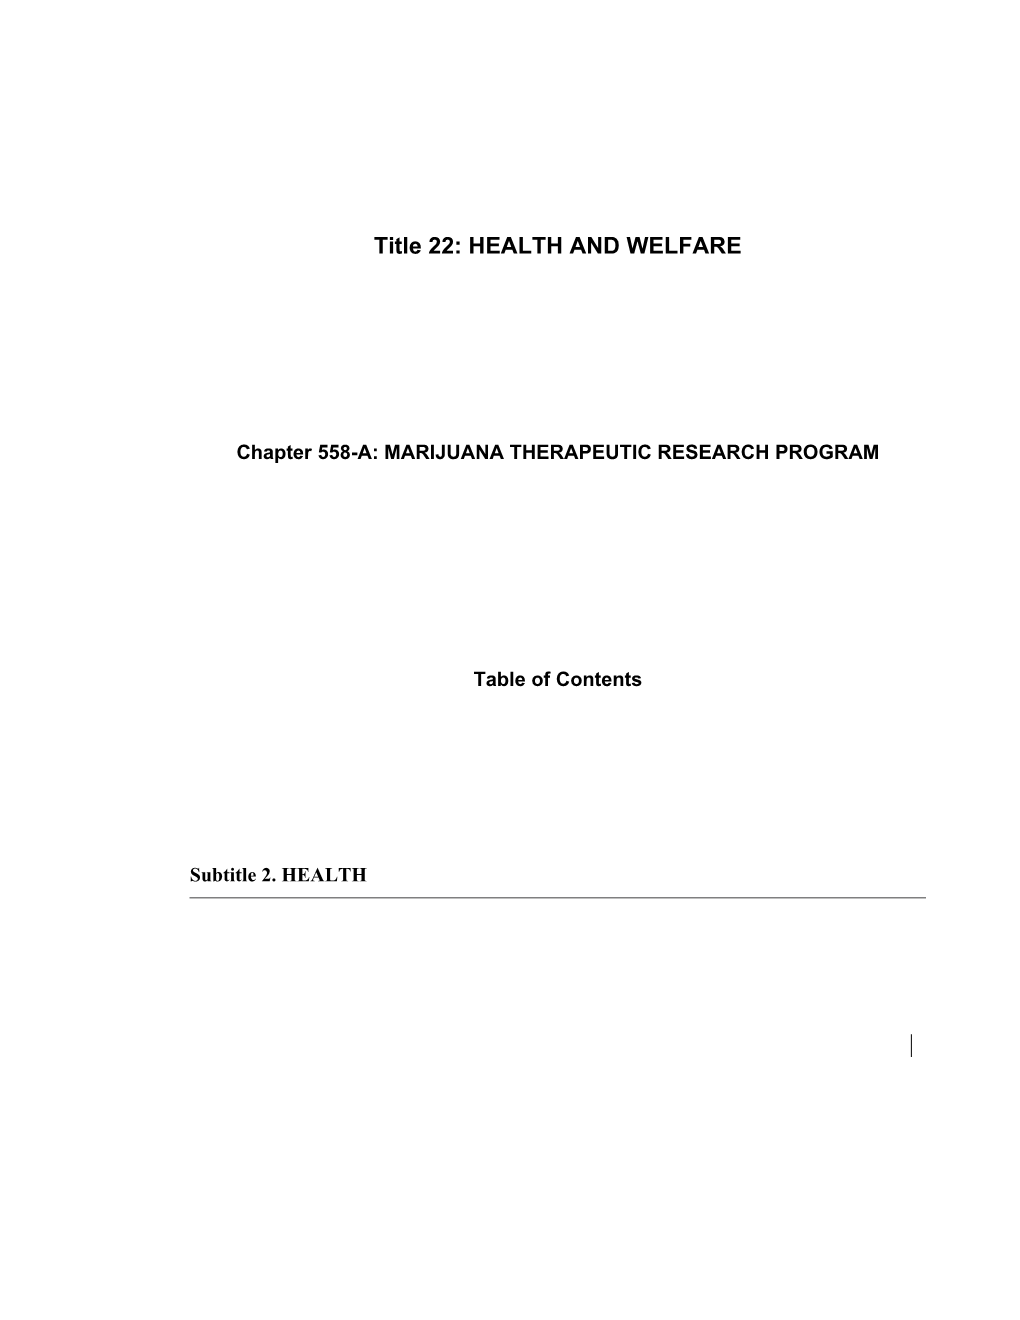 Title 22: HEALTH and WELFARE s2